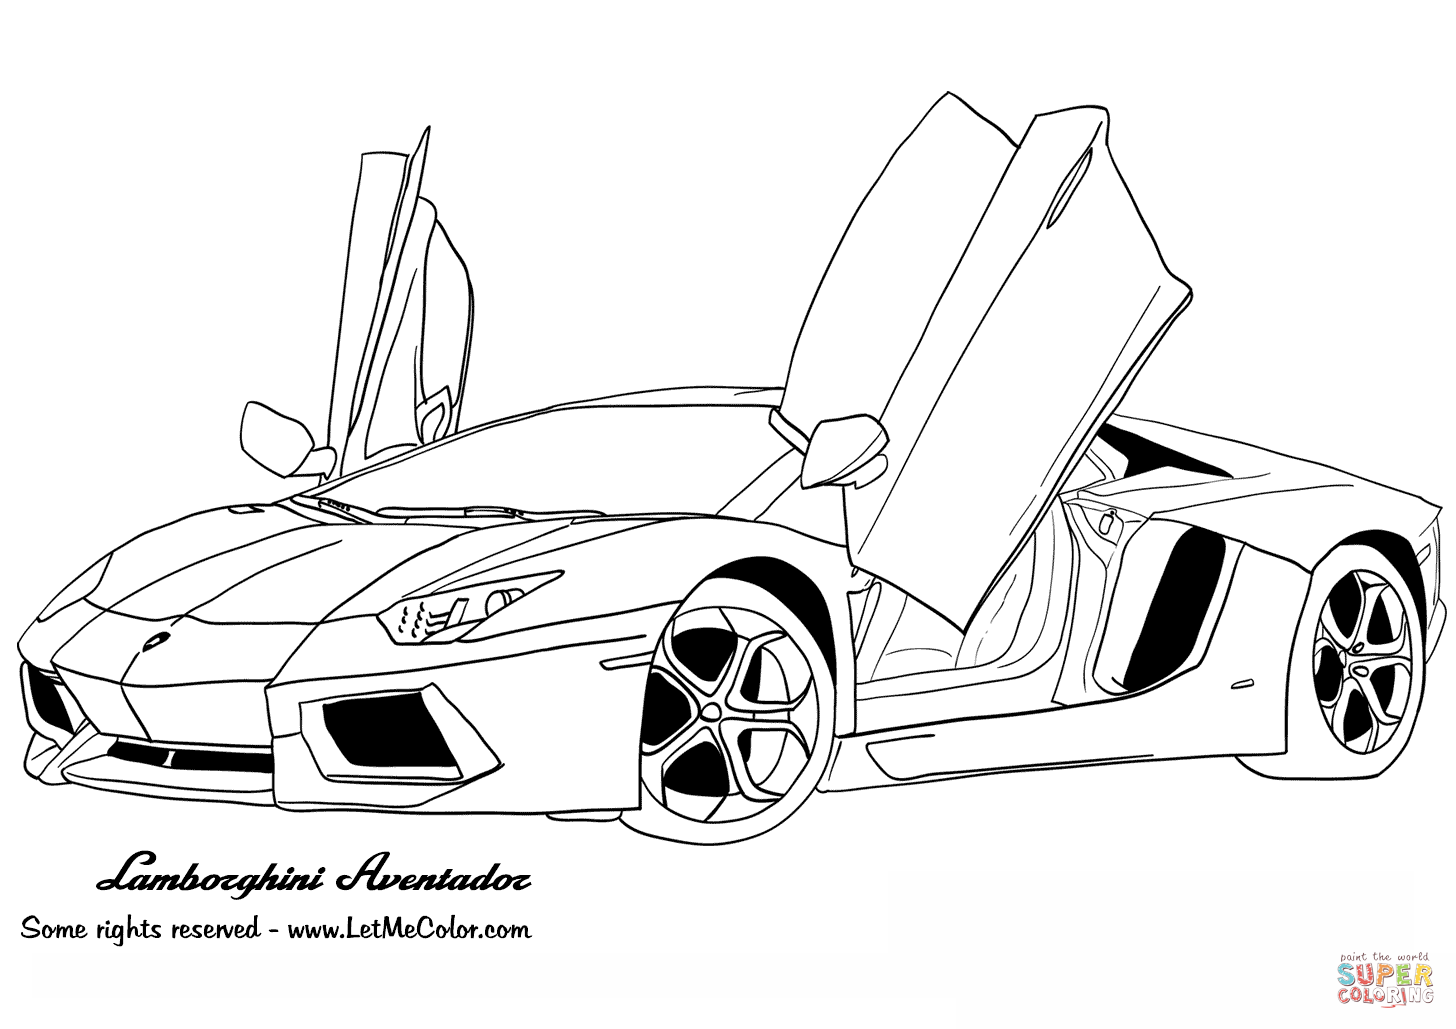 Lamborghini aventador coloring page free printable coloring pages